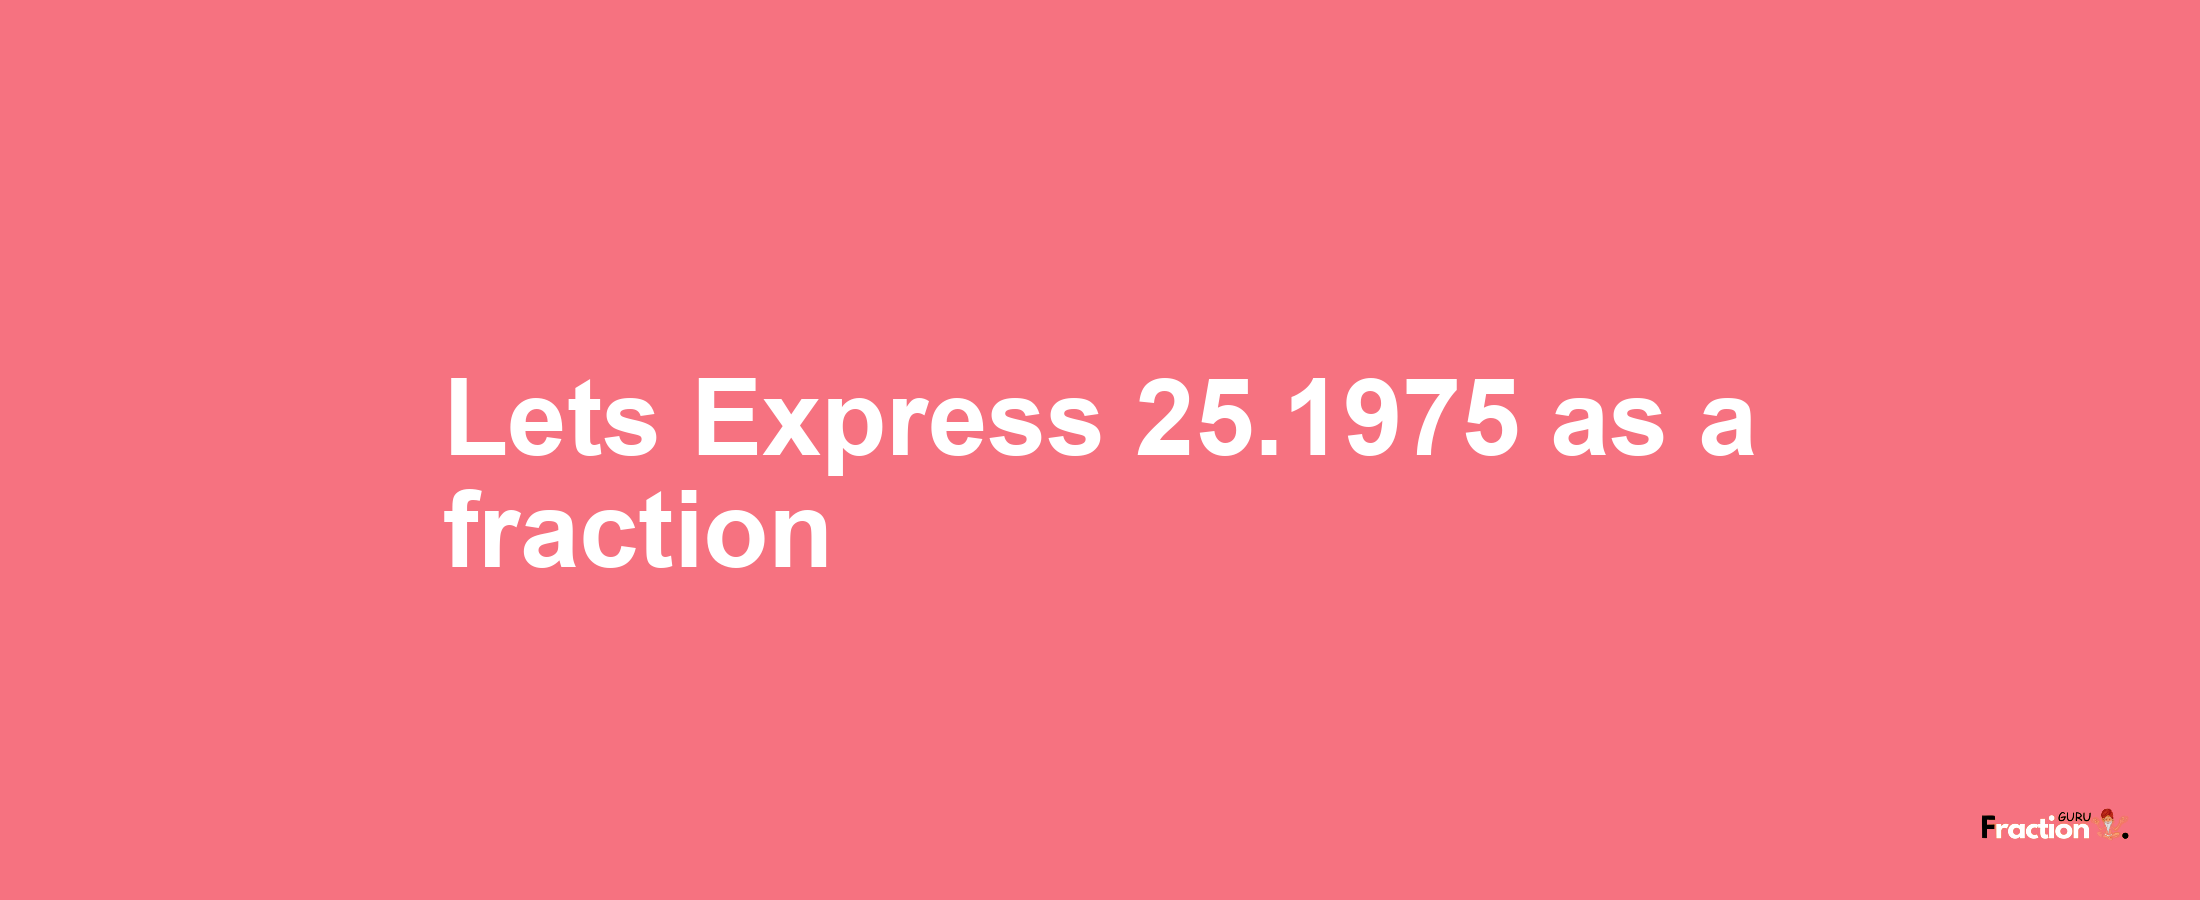 Lets Express 25.1975 as afraction